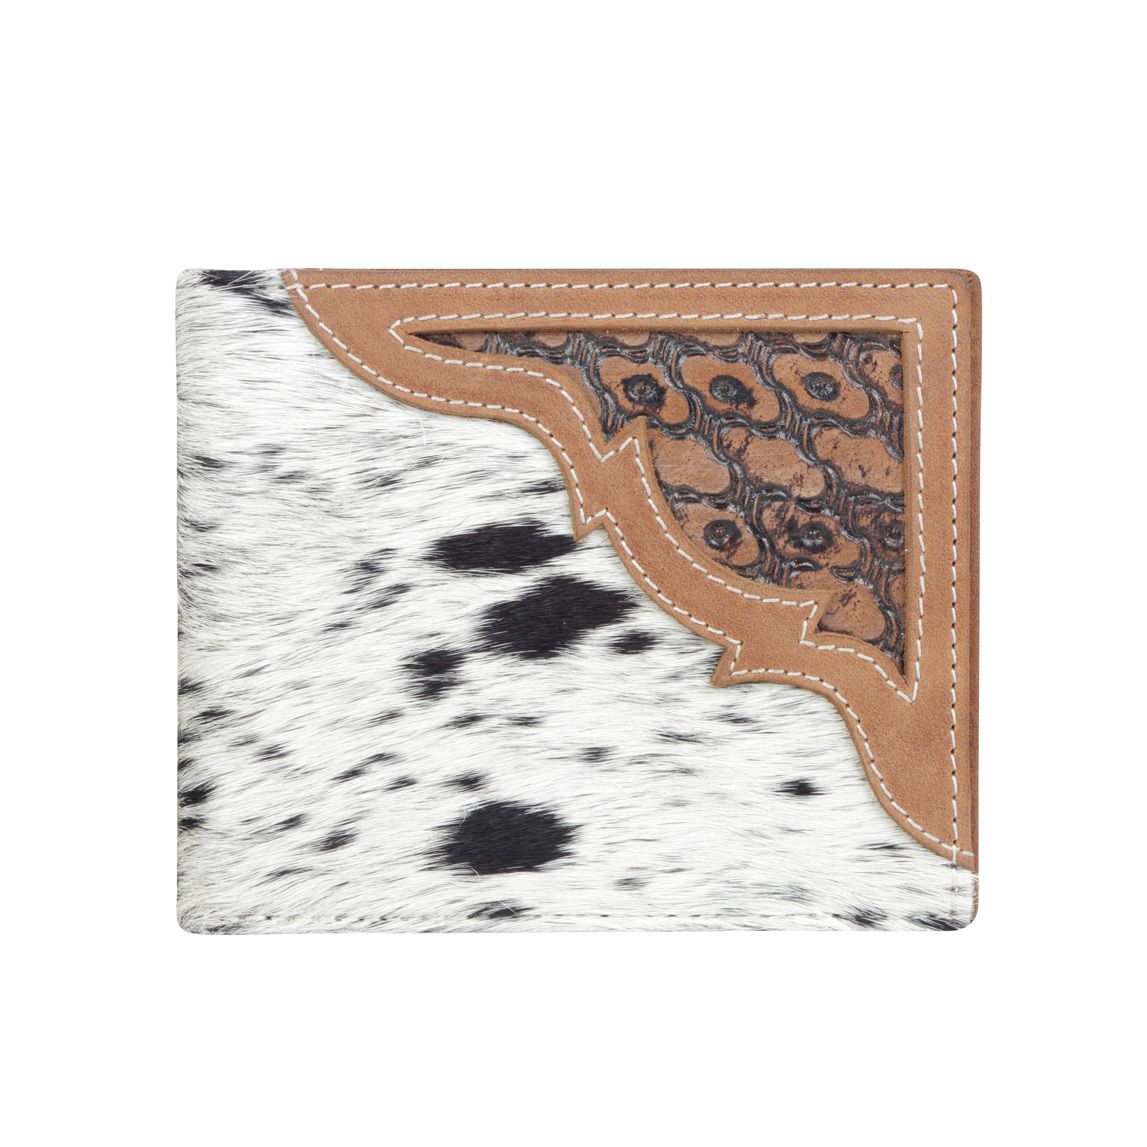 Myra Bag Imprint Leather and Hair-On Wallet